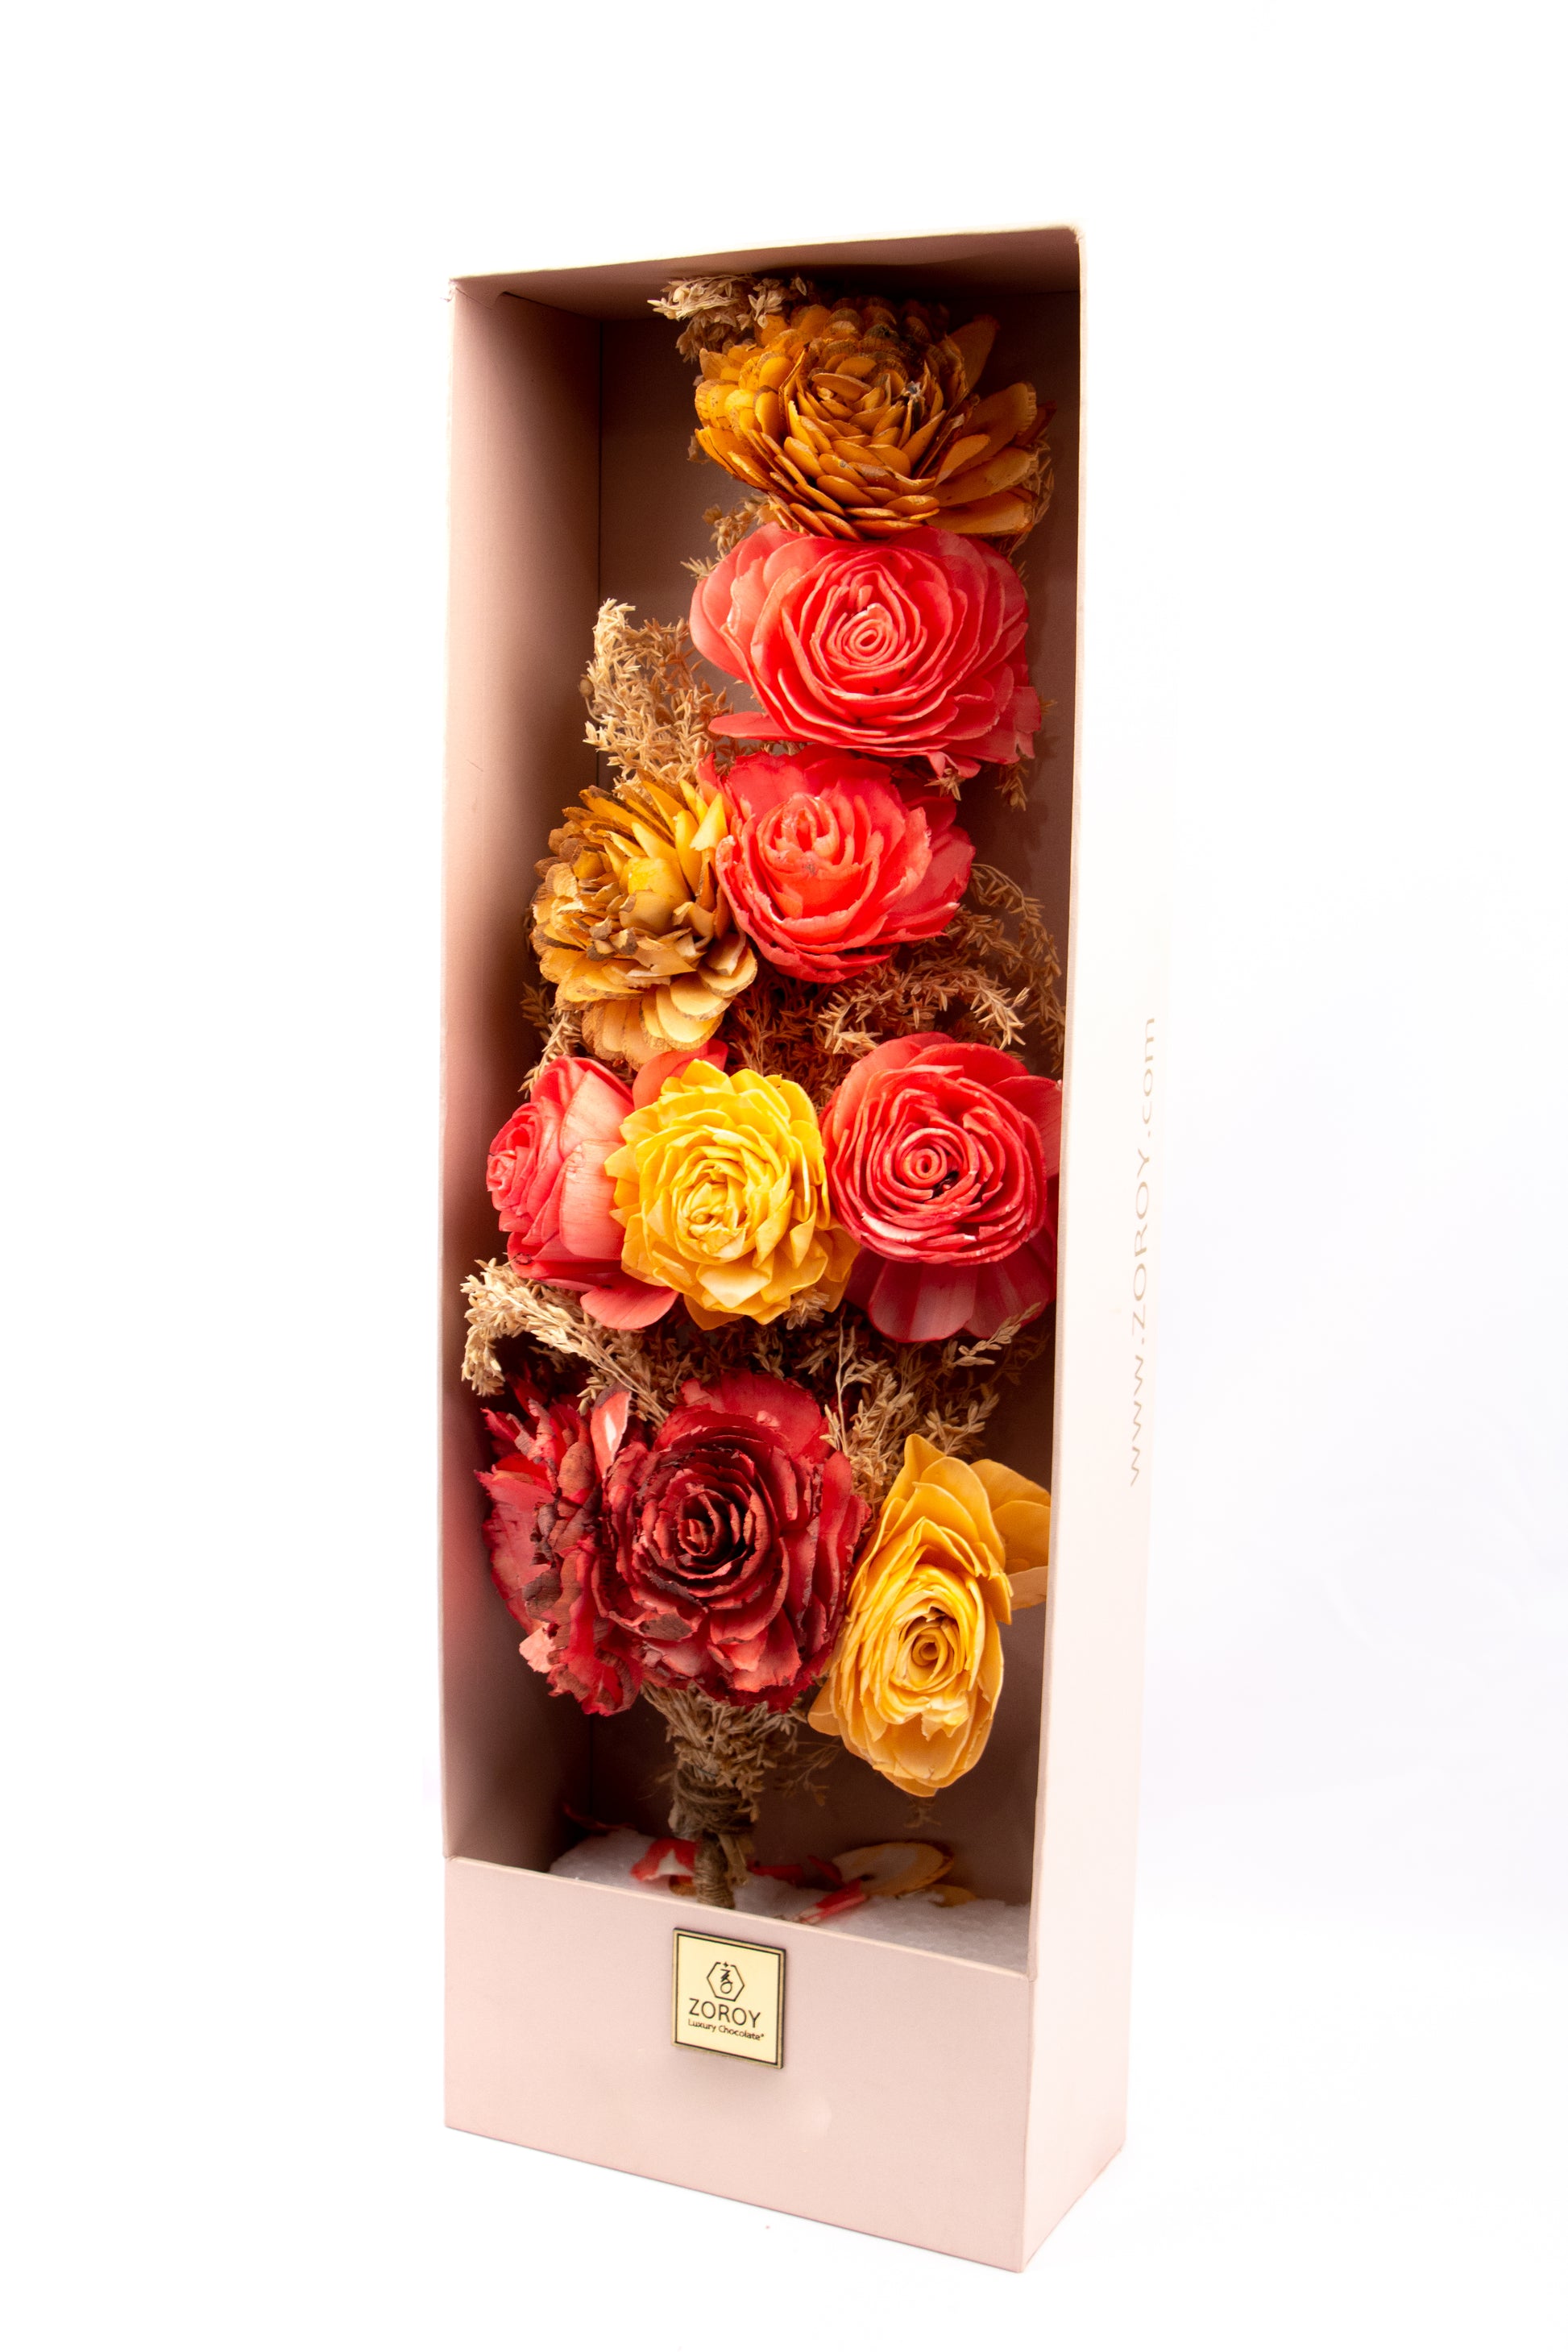 ZOROY The Finessee Dry flower bouquet in box for any ocassion | 10 flowers Bunch arrangement for Gifting & Home Decor | Multicoloured floral Large